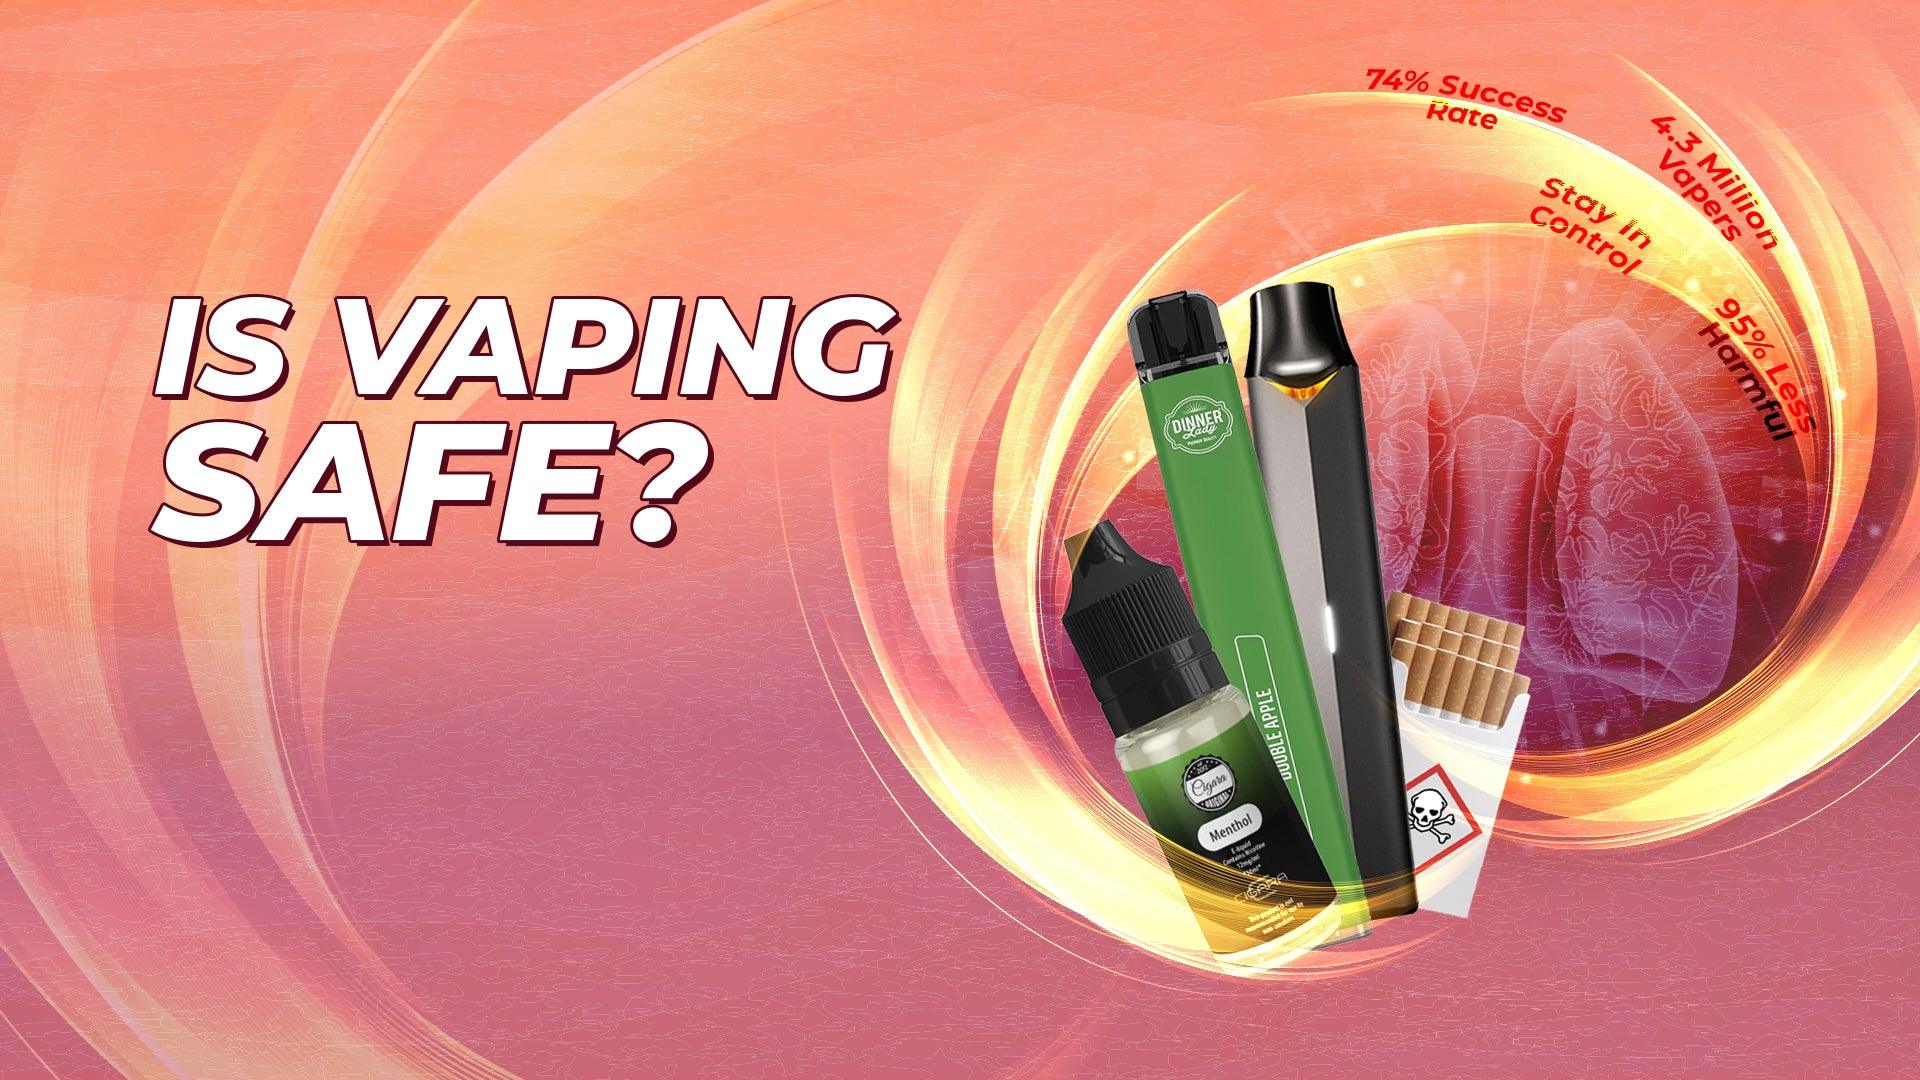 Is Vaping Safe? - Category:Vaping, Sub Category:Quit Smoking, Sub Category:Safety